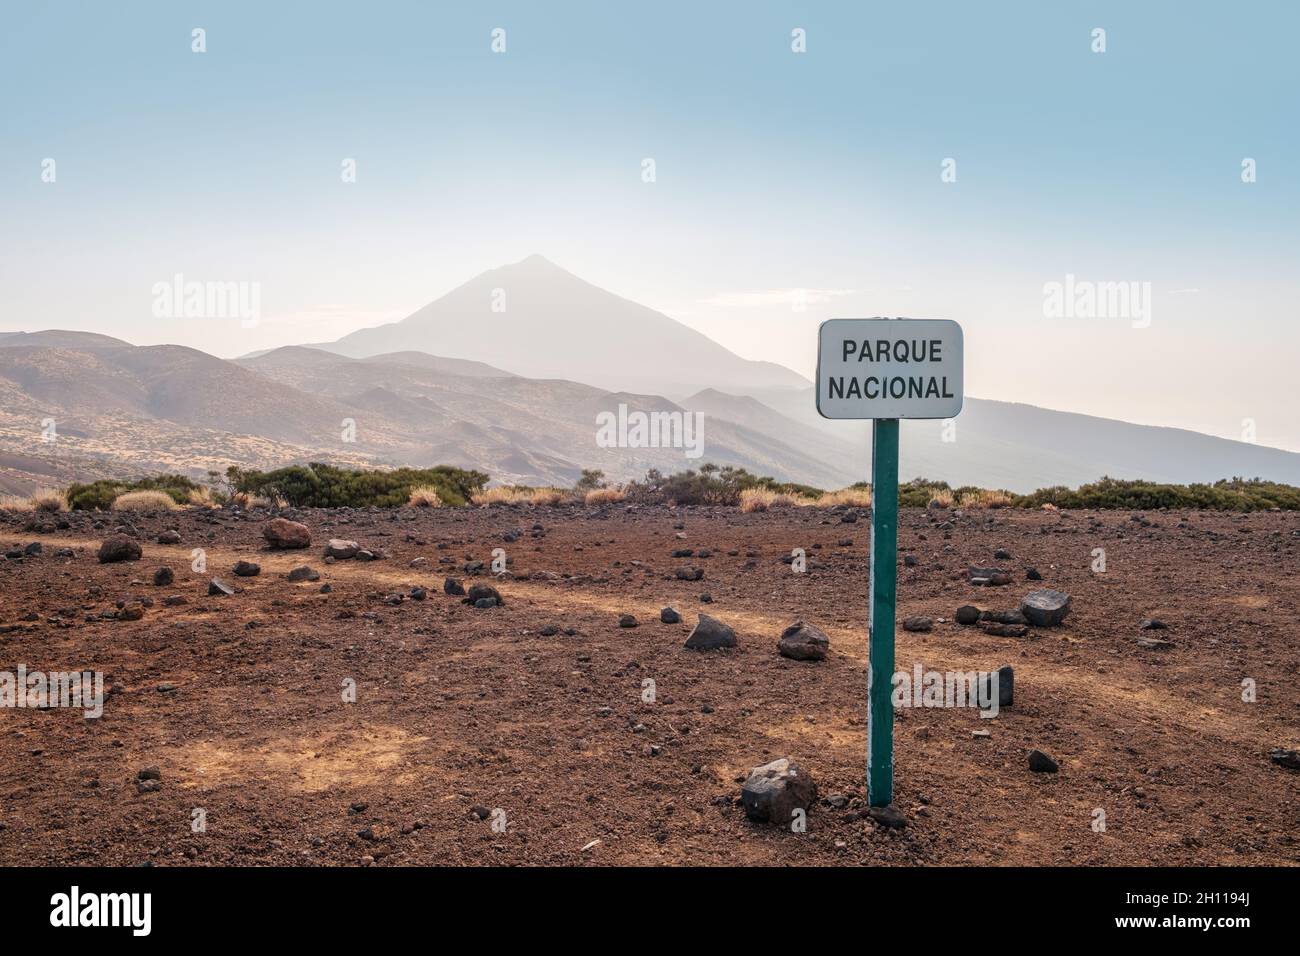 Teide National Park in Tenerife, Volcano and mountain landscape Stock Photo